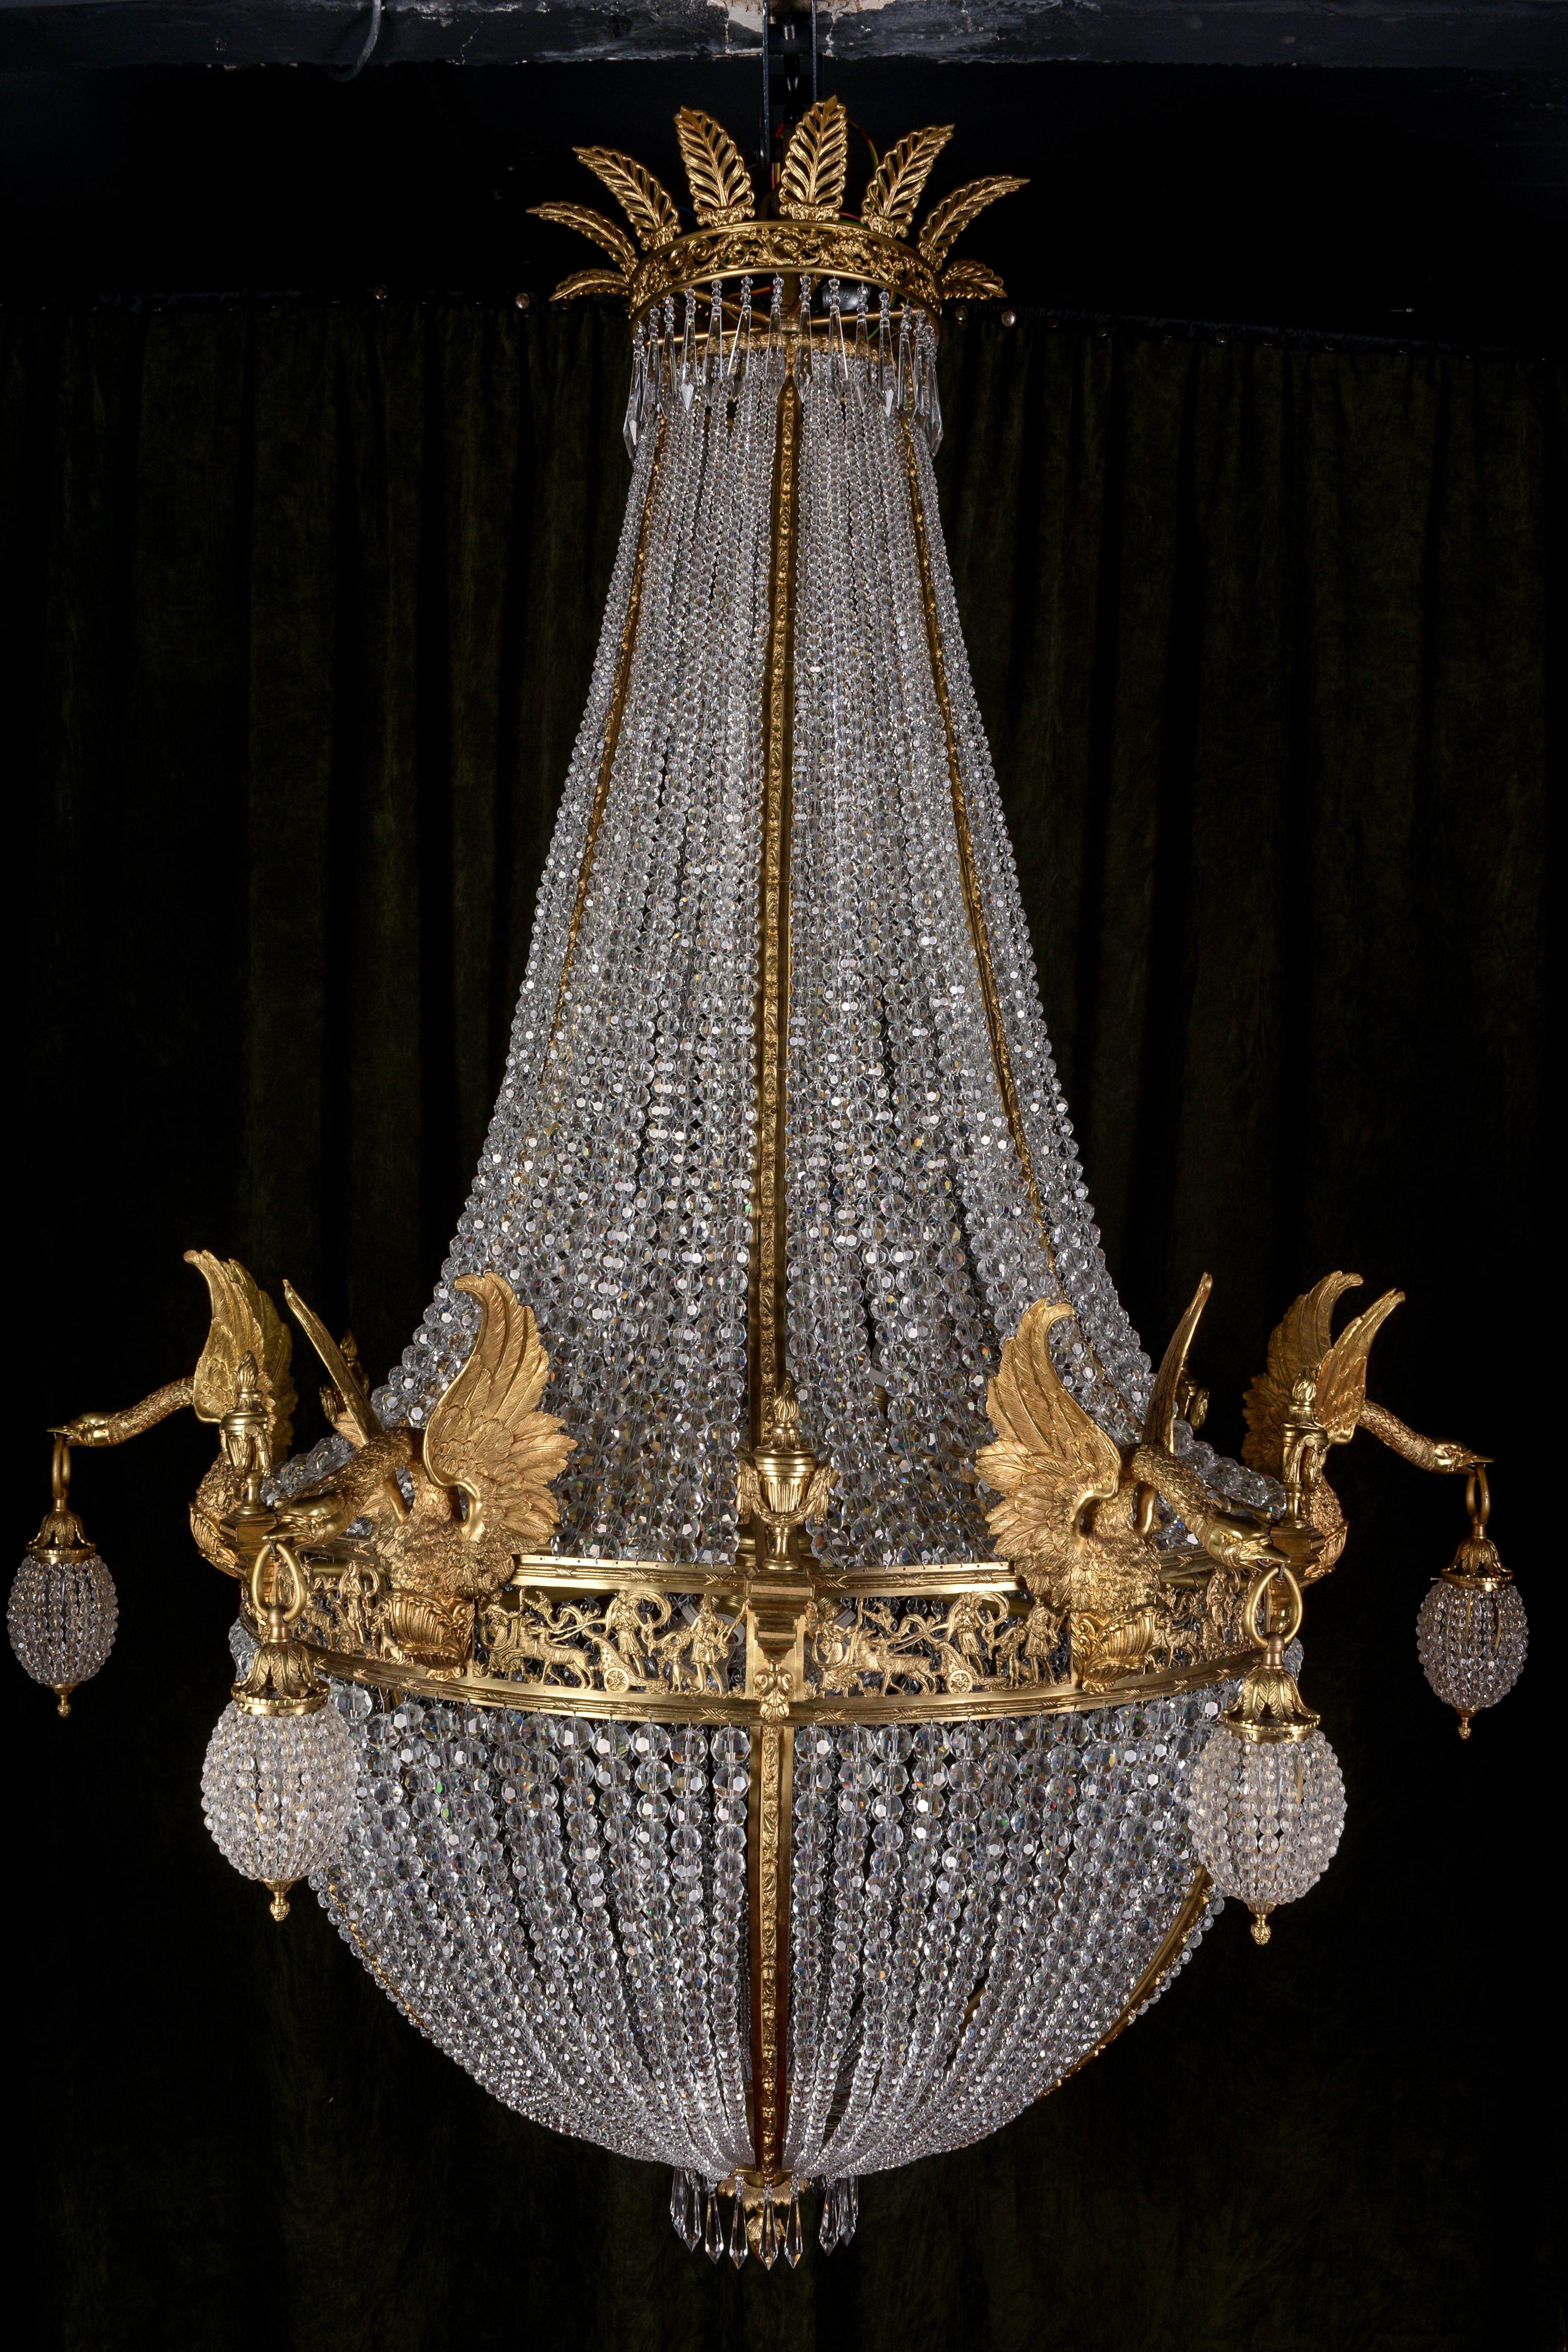 Monumental Majestic splendid chandelier in Empire Style referred to Empress Joséphine.
Exceptionally fine, engraved and cast Bronze. Basket-formed corpus from hand-cut frenches ball prisms (over 11,000 pieces). Connected through wide, mythological